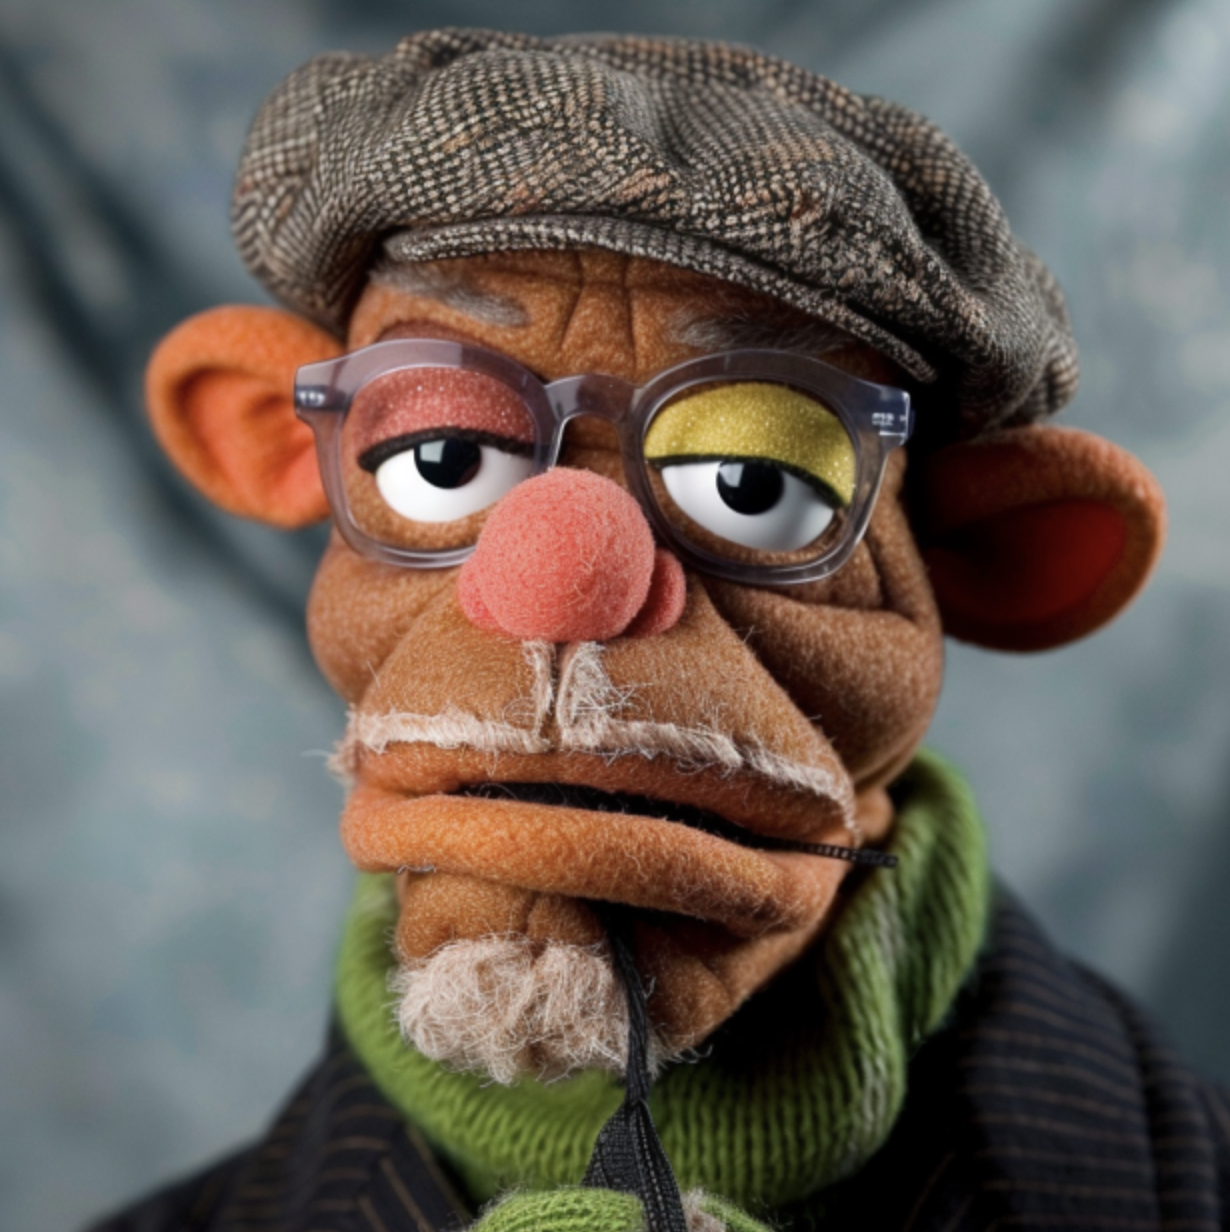 Close-up of a Muppet with glasses, a cap, thin white mustache and goatee, and striped scarf looking pensive